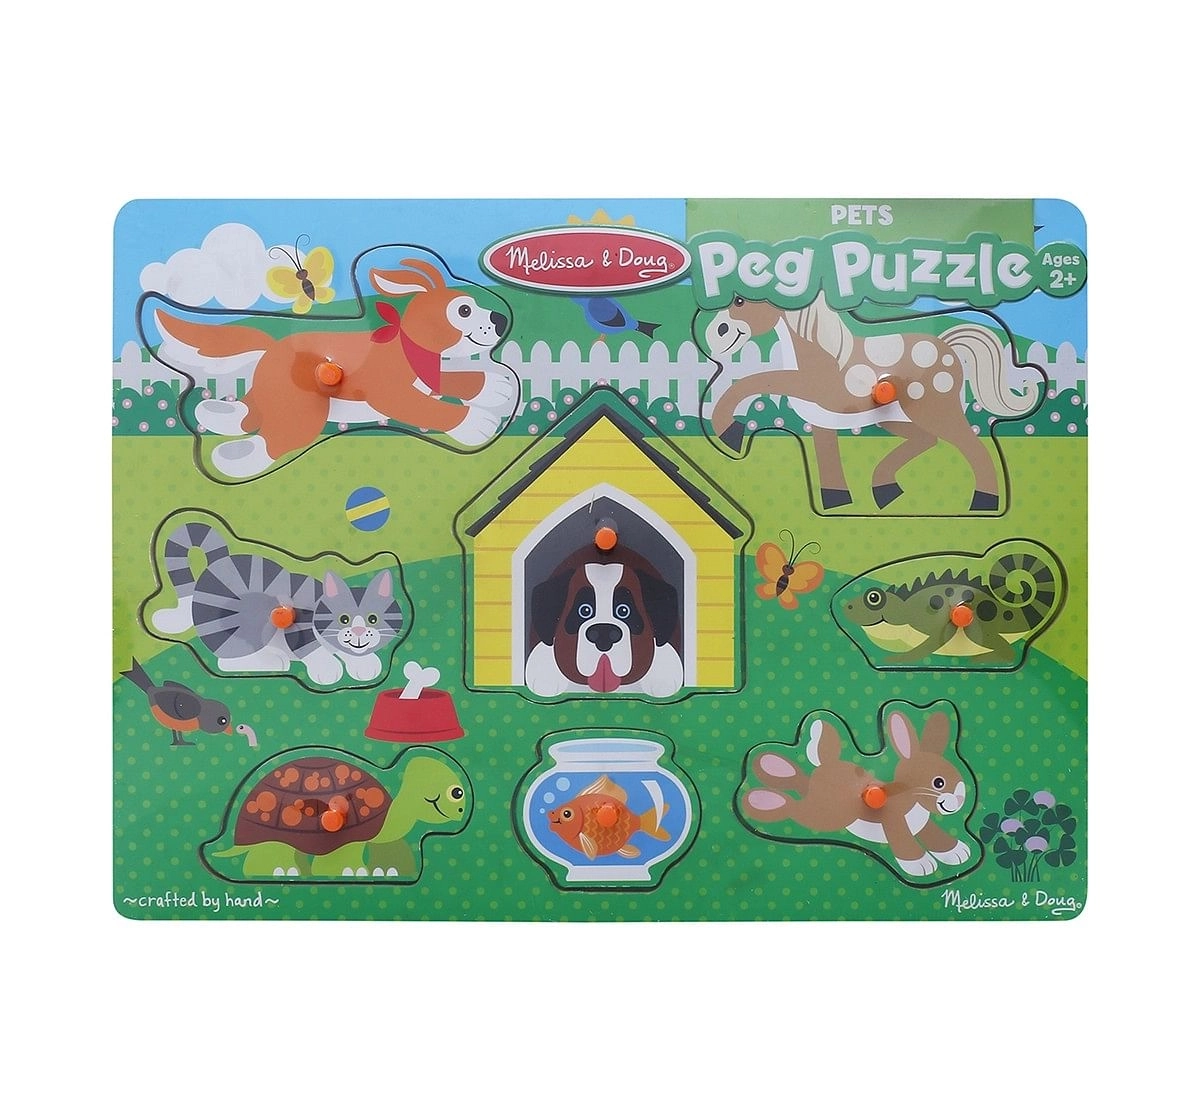 Melissa & Doug Pets Peg Puzzle (Colorful Animal Artwork, Extra-Thick Wooden Construction, 8 Pieces) Wooden Toys for Kids age 24M+ 